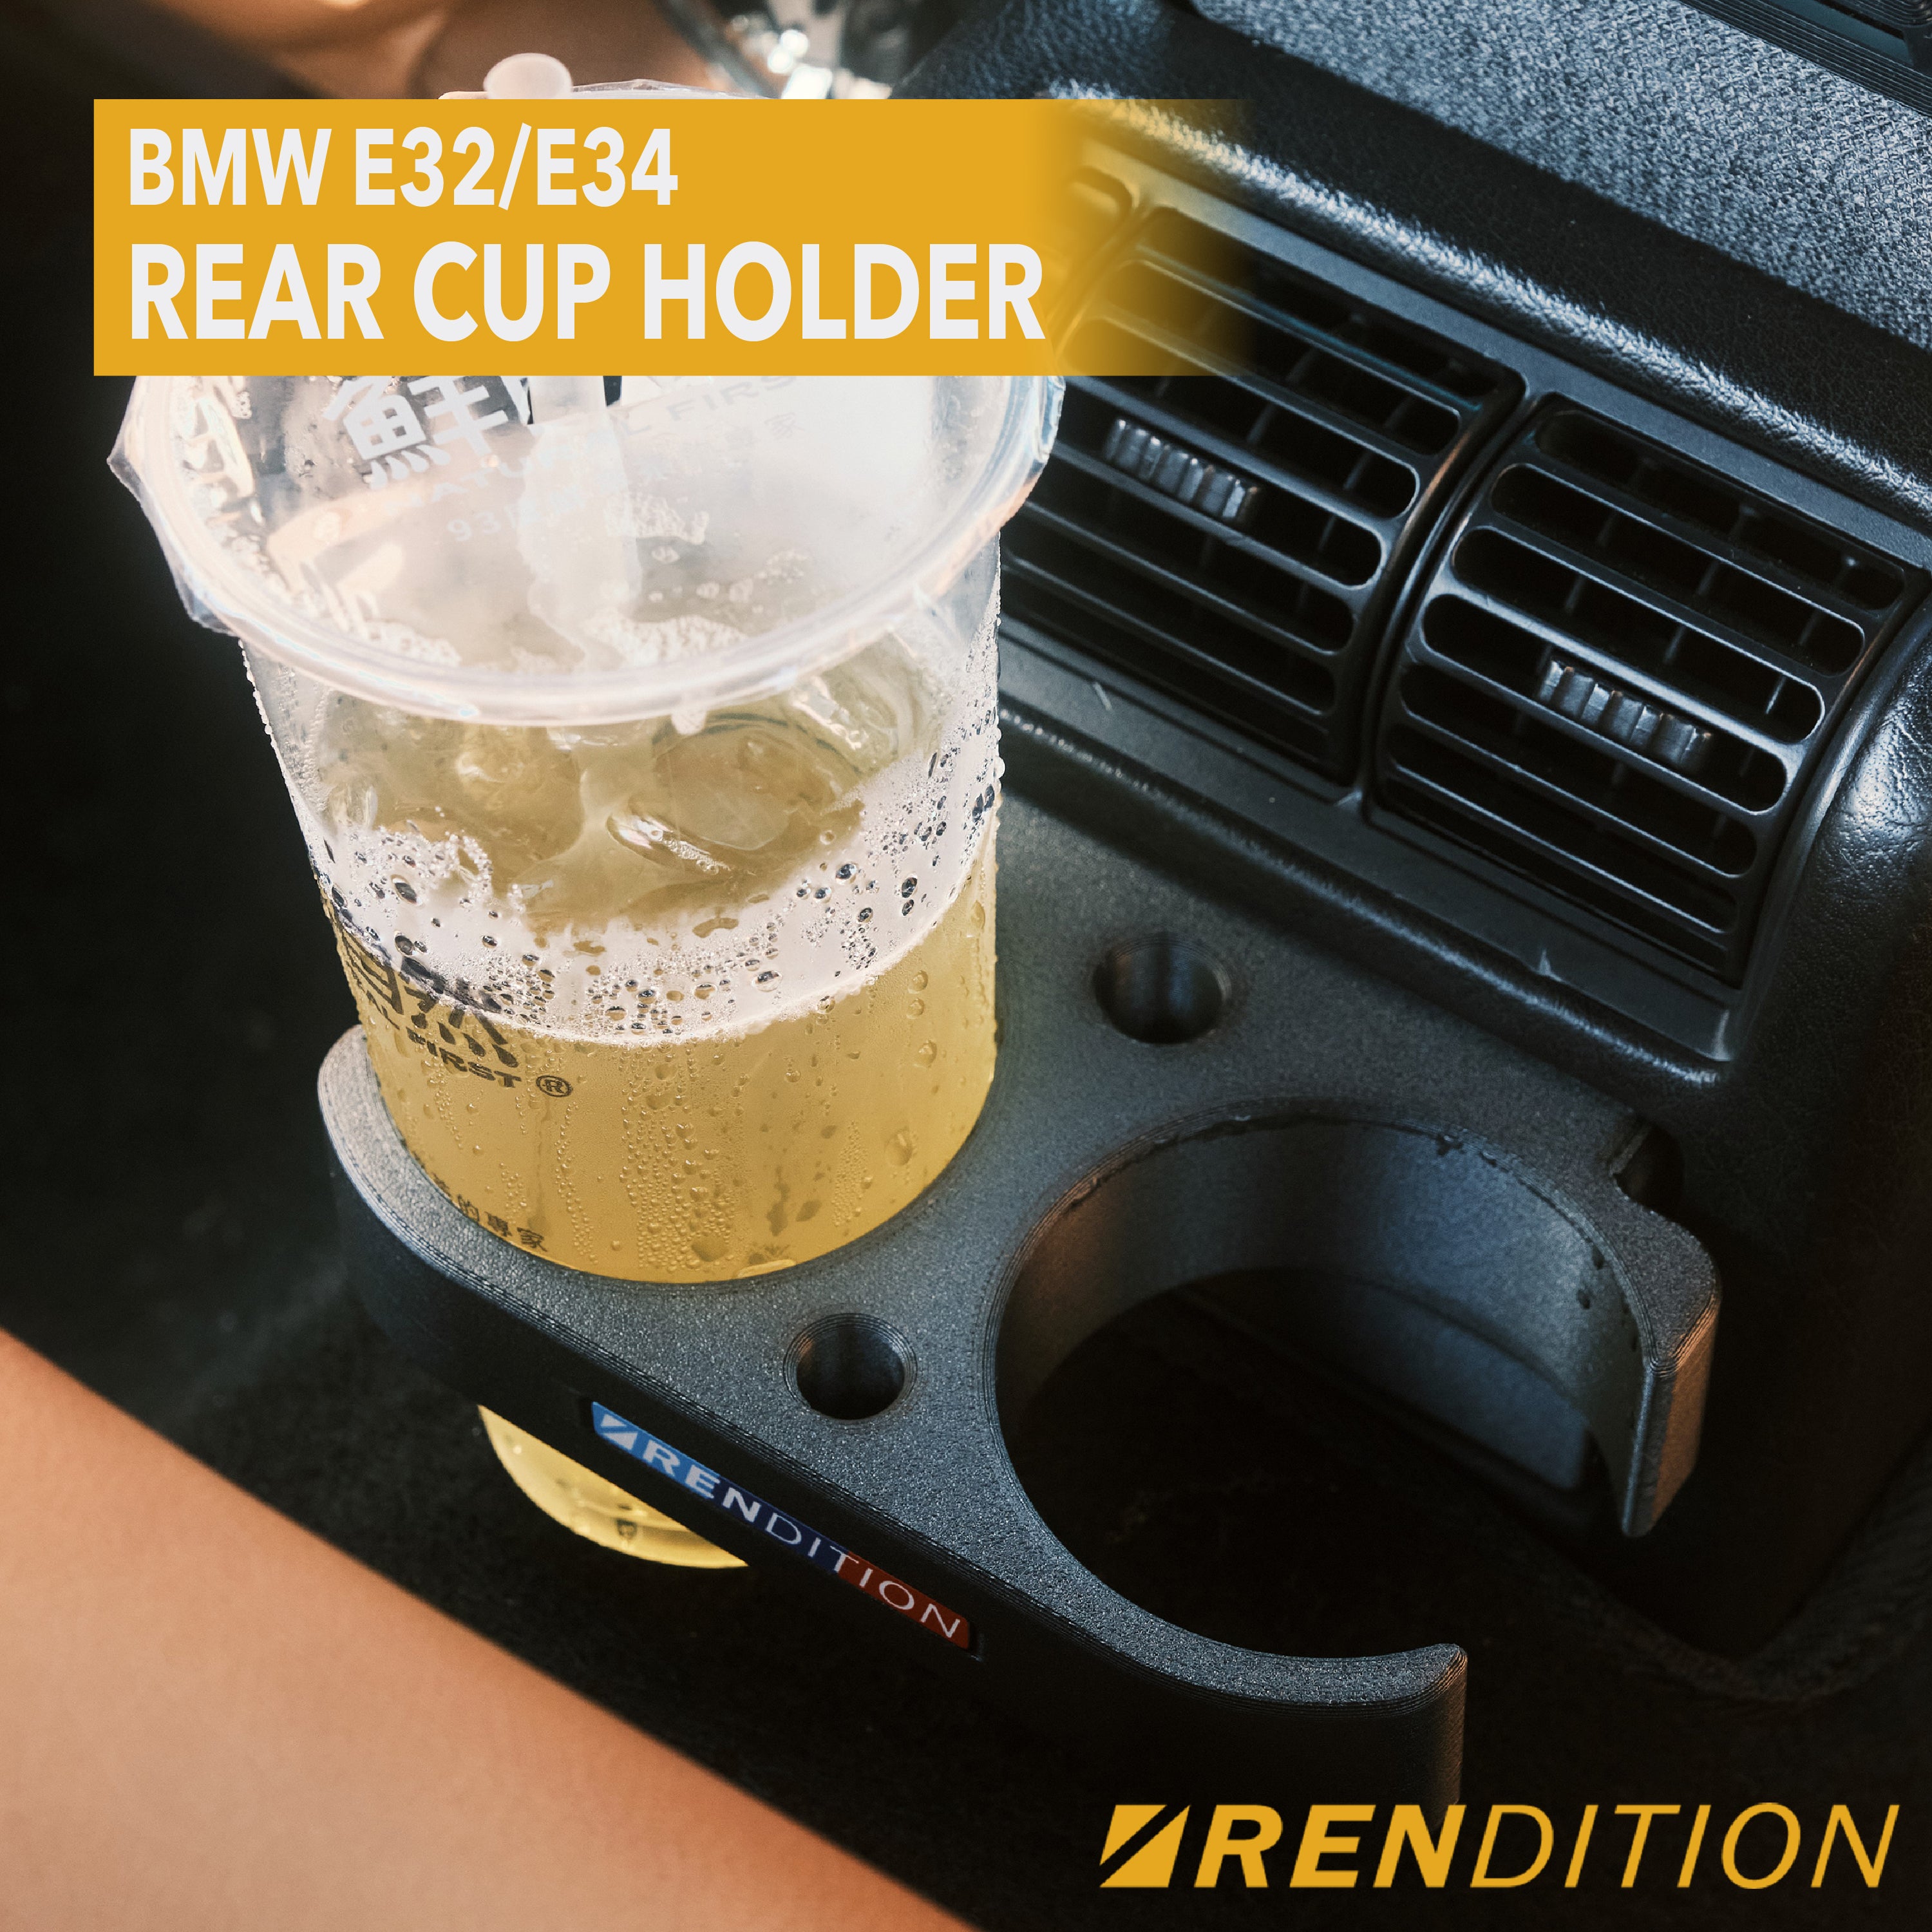 BMW E39 REAR CUP HOLDER USB CHARGER V1.8